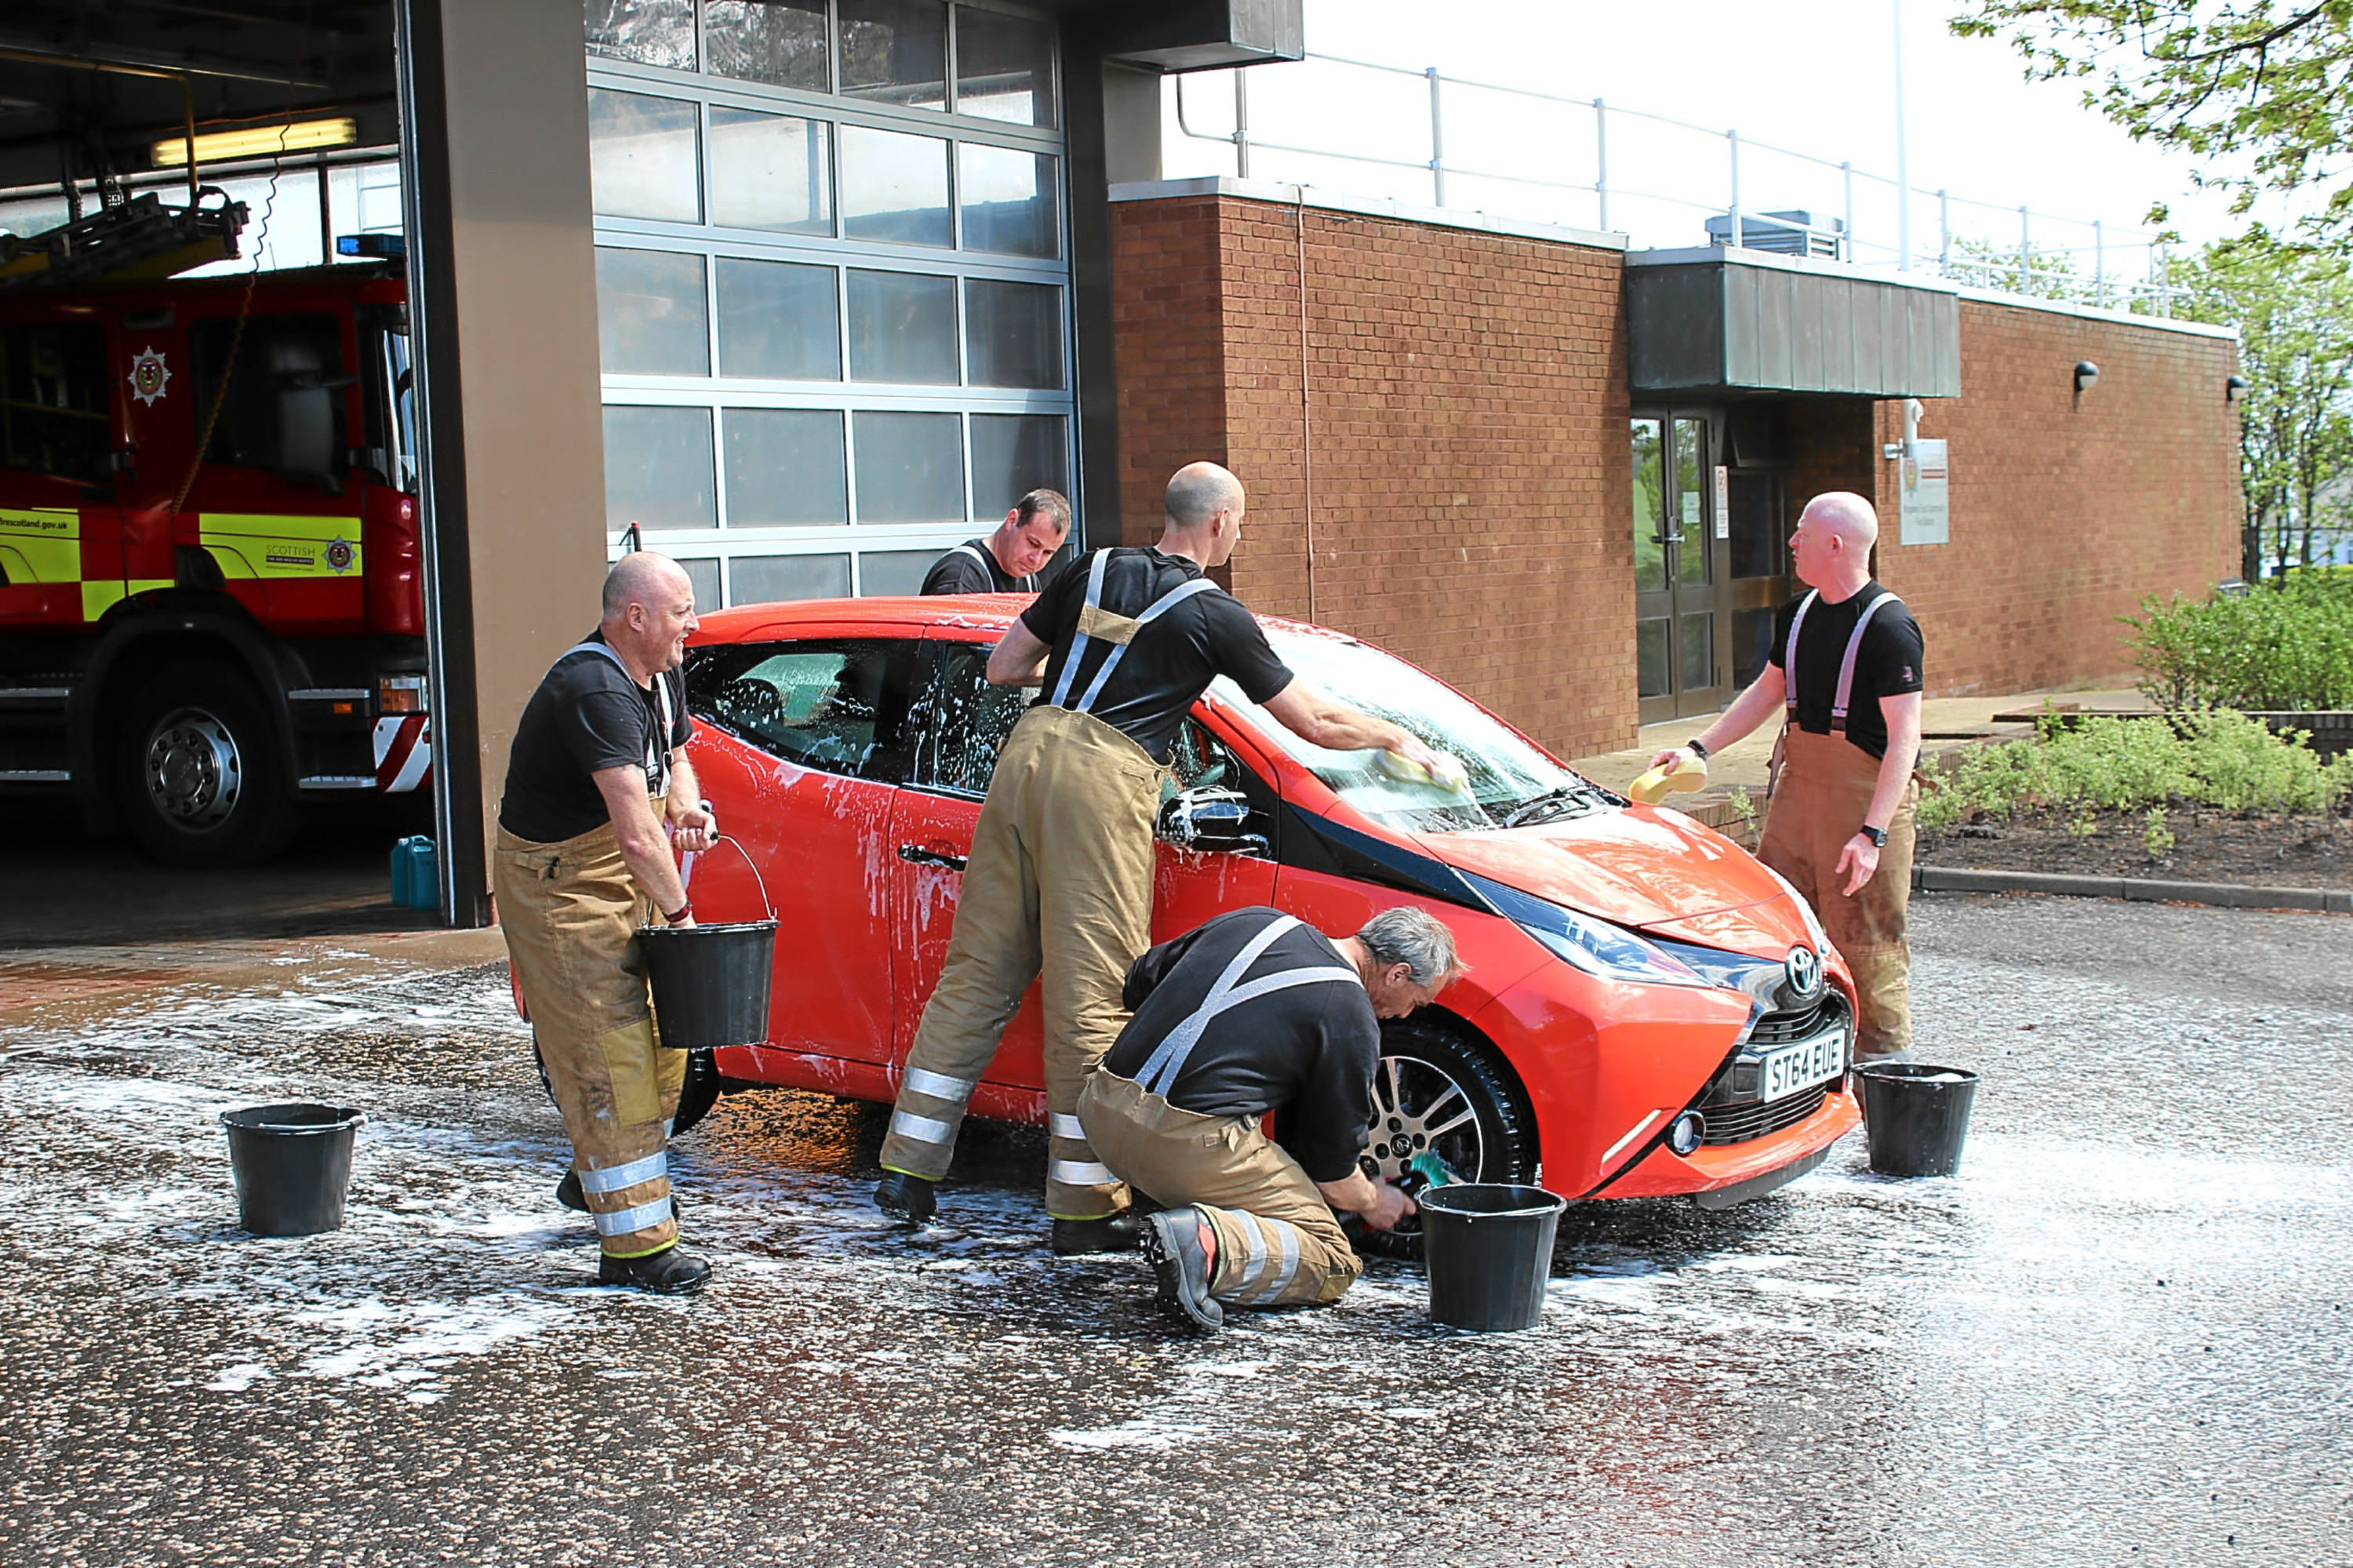 Firefighters from Kingsway East red watch wash cars for the Firefighters Charity.